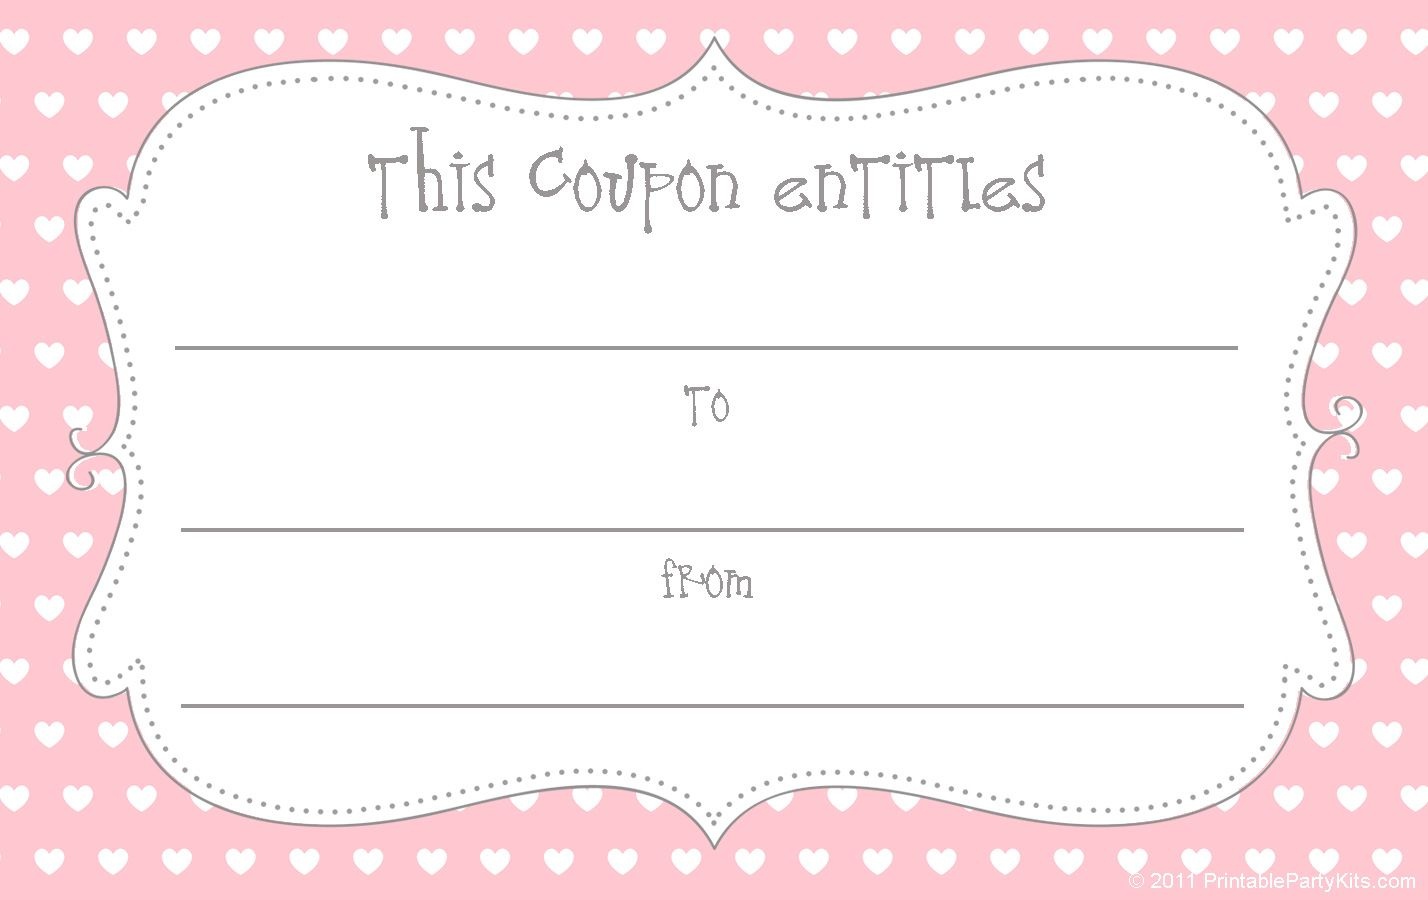 15 Sets Of Free Printable Love Coupons And Templates - Free Printable Love Coupons